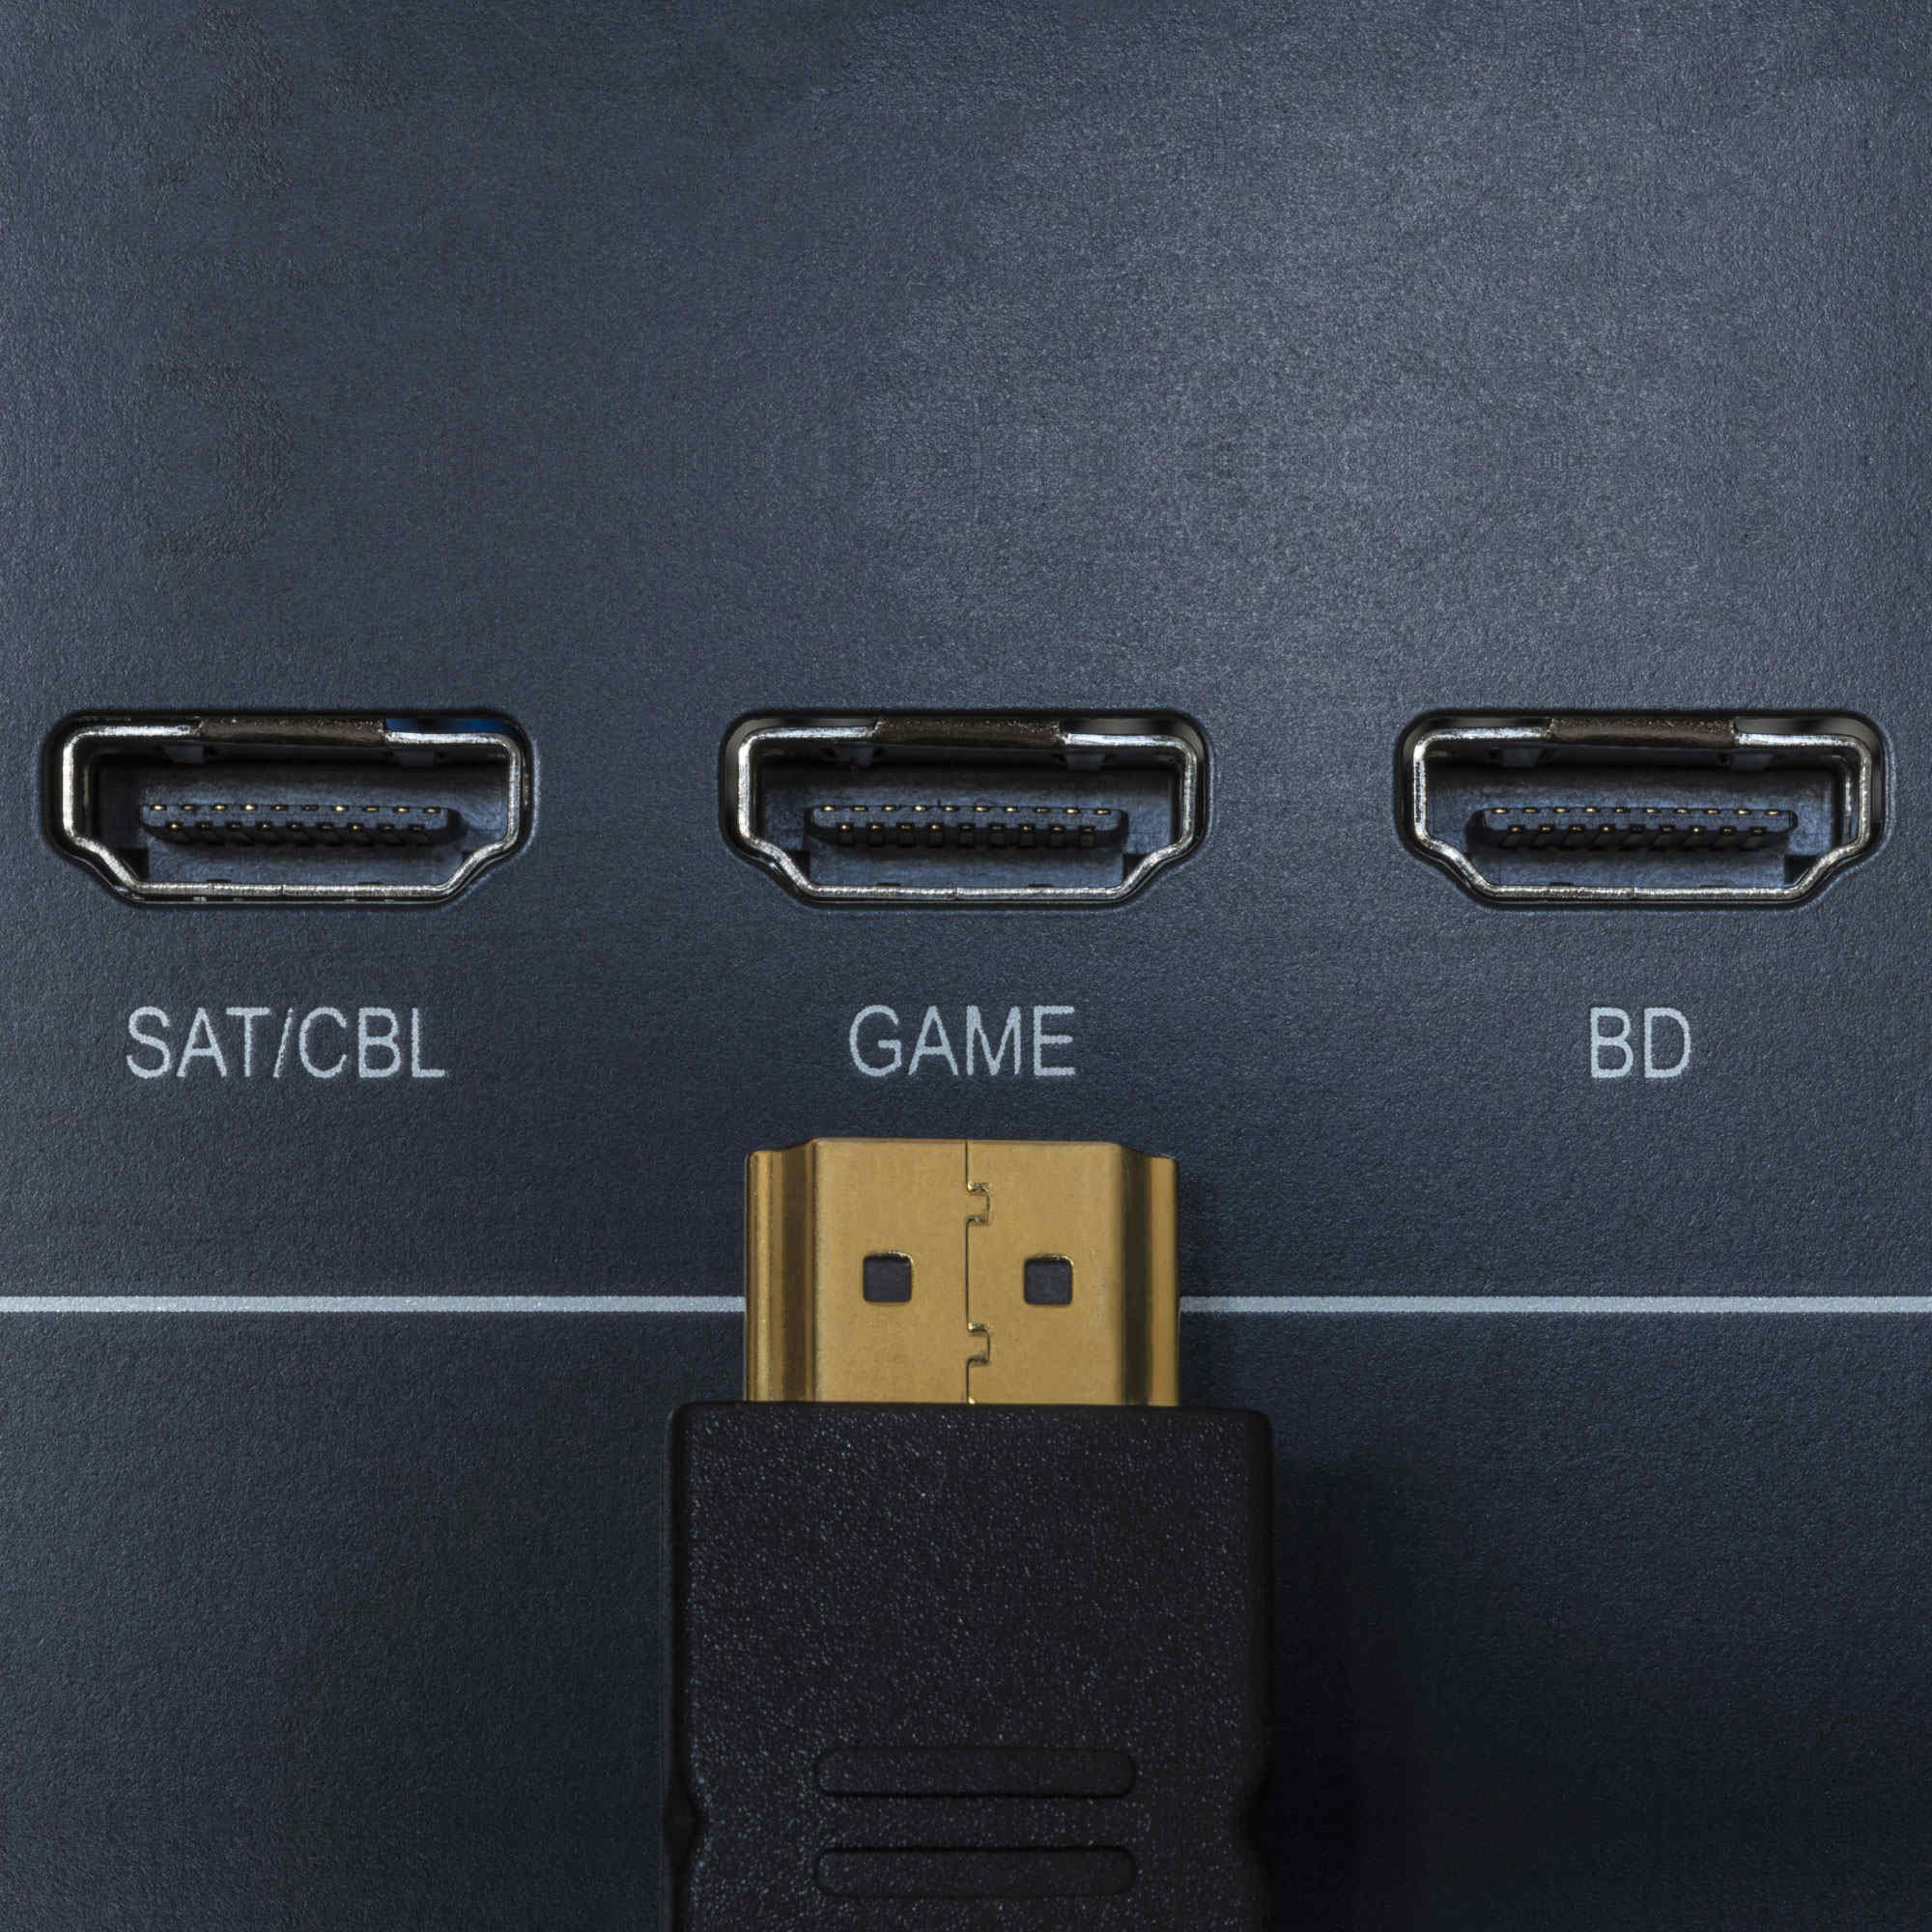 HDMI cable with ethernet 20.00m